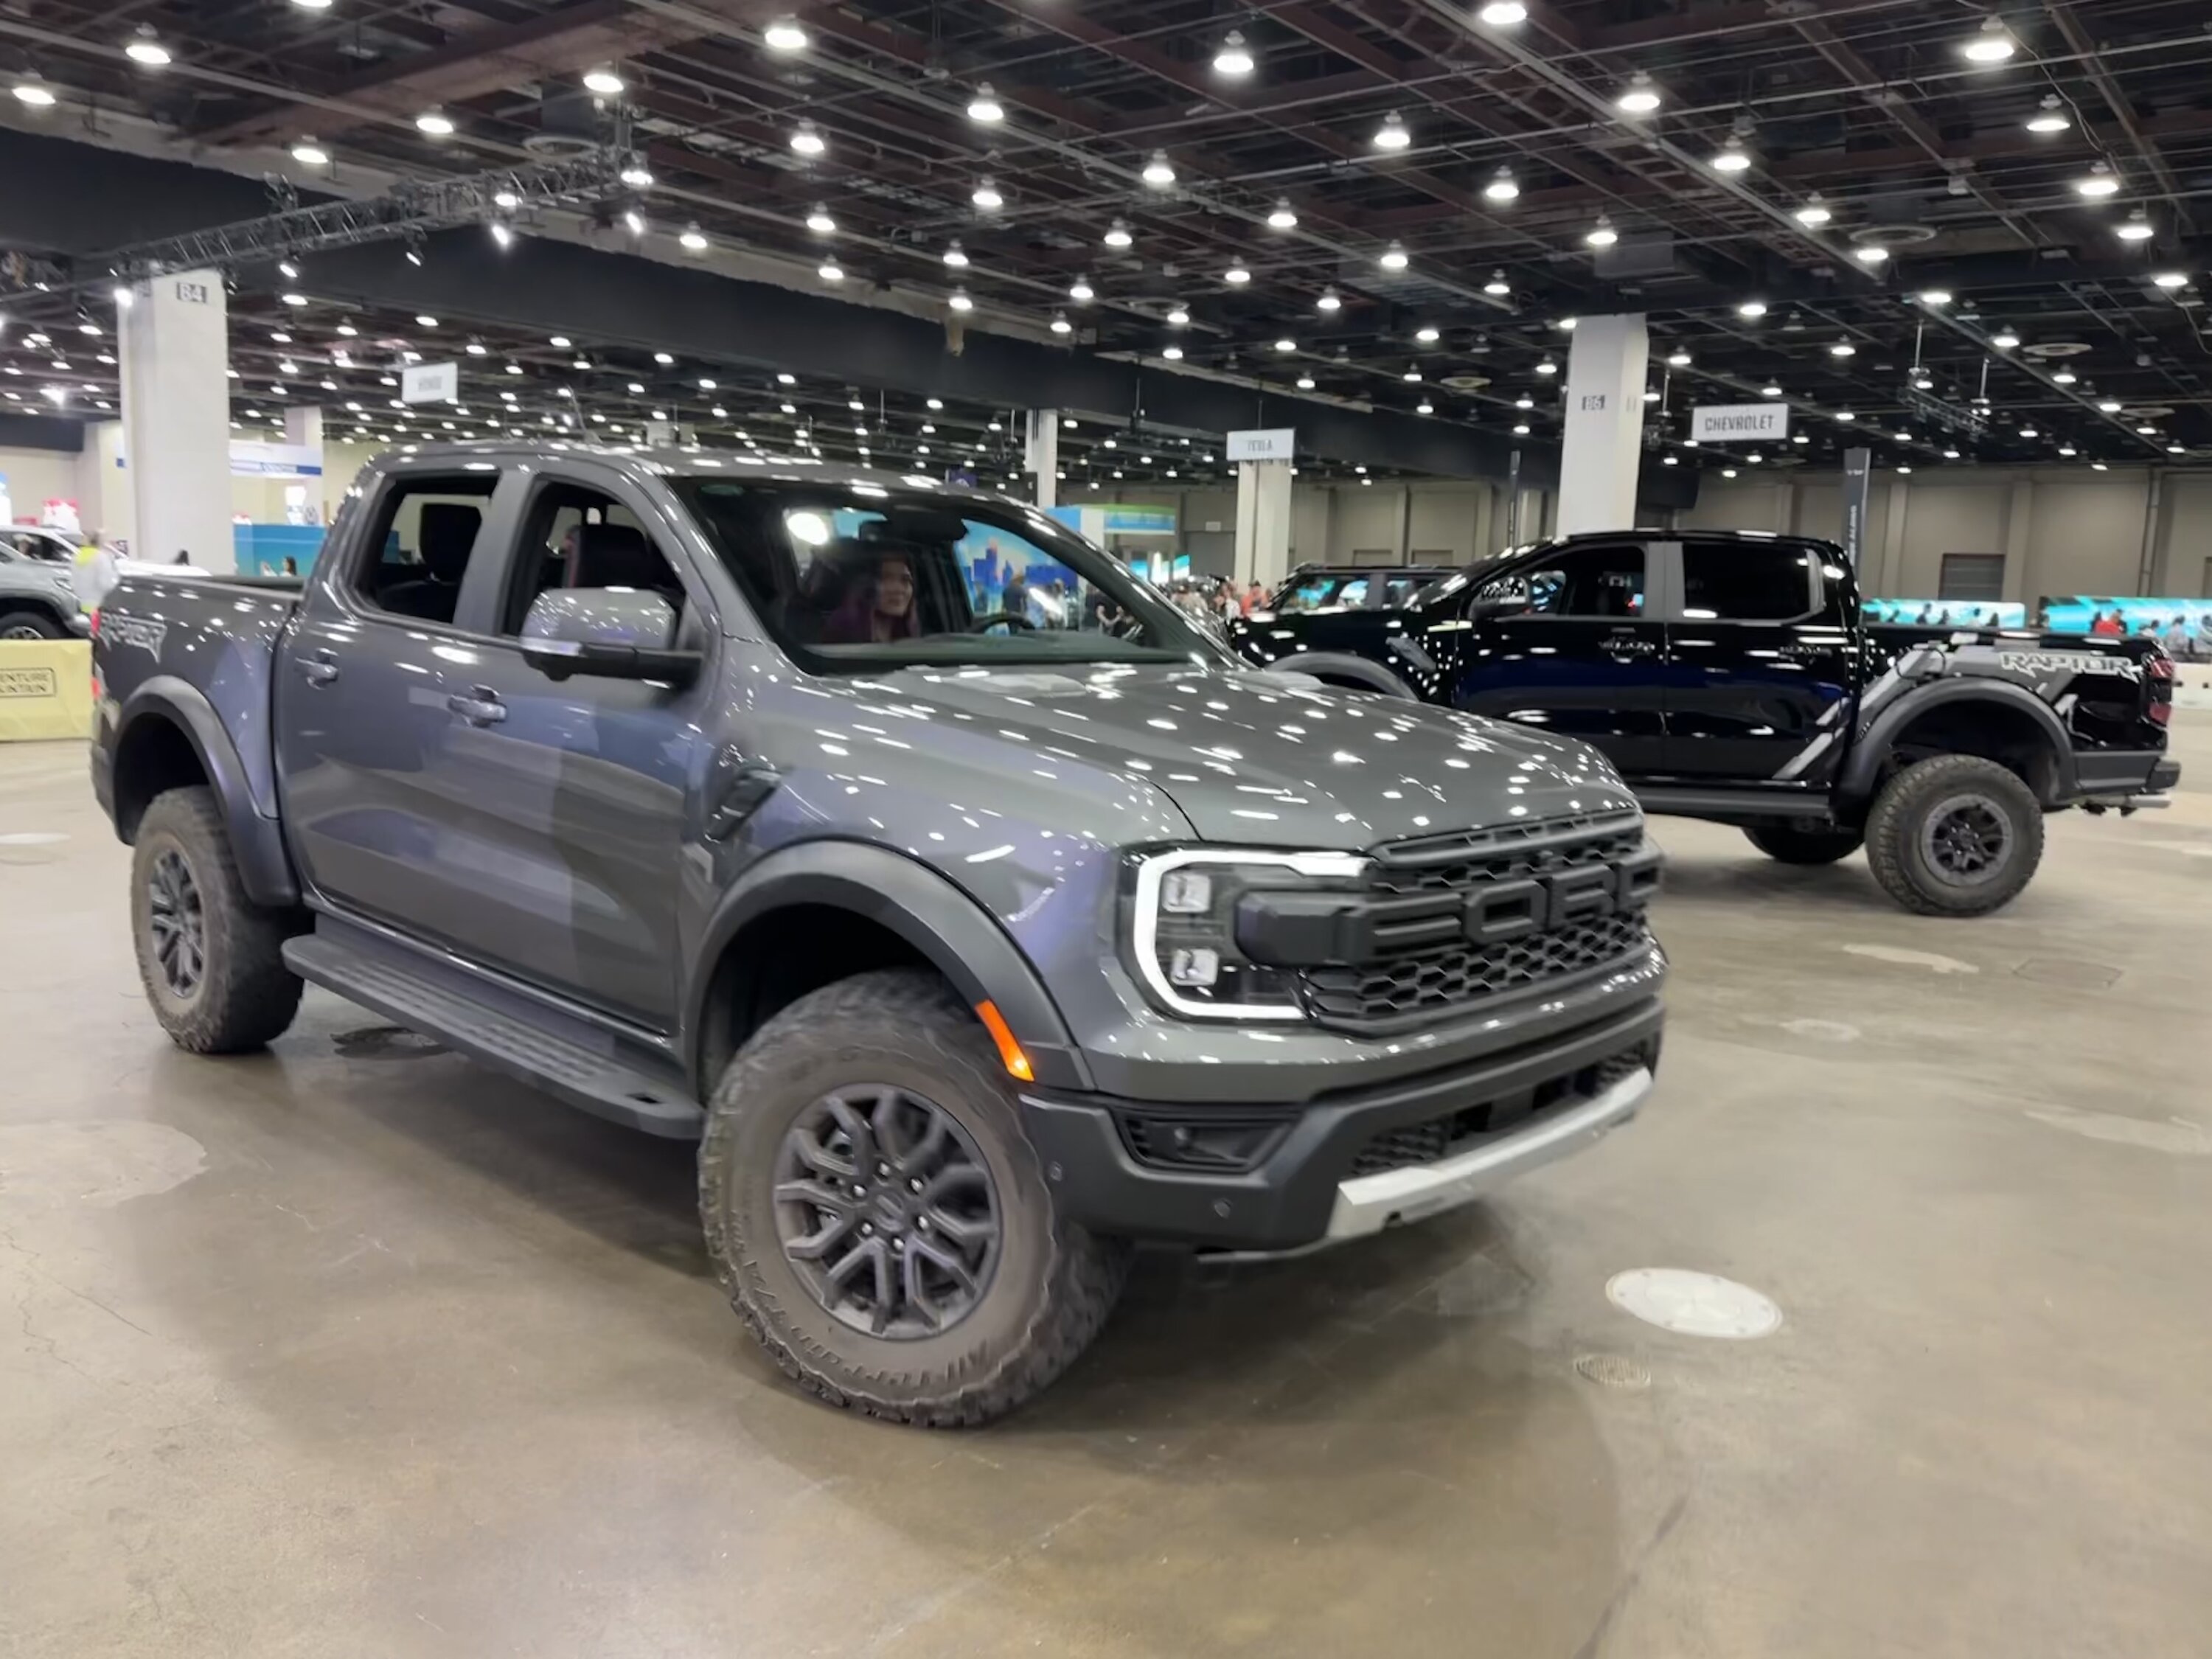 Ford Ranger 2024 Ranger Raptor is 110% worth the money... my impressions from impromptu visit to Detroit Autoshow A261EA43-943B-492B-9147-CF66D614268C